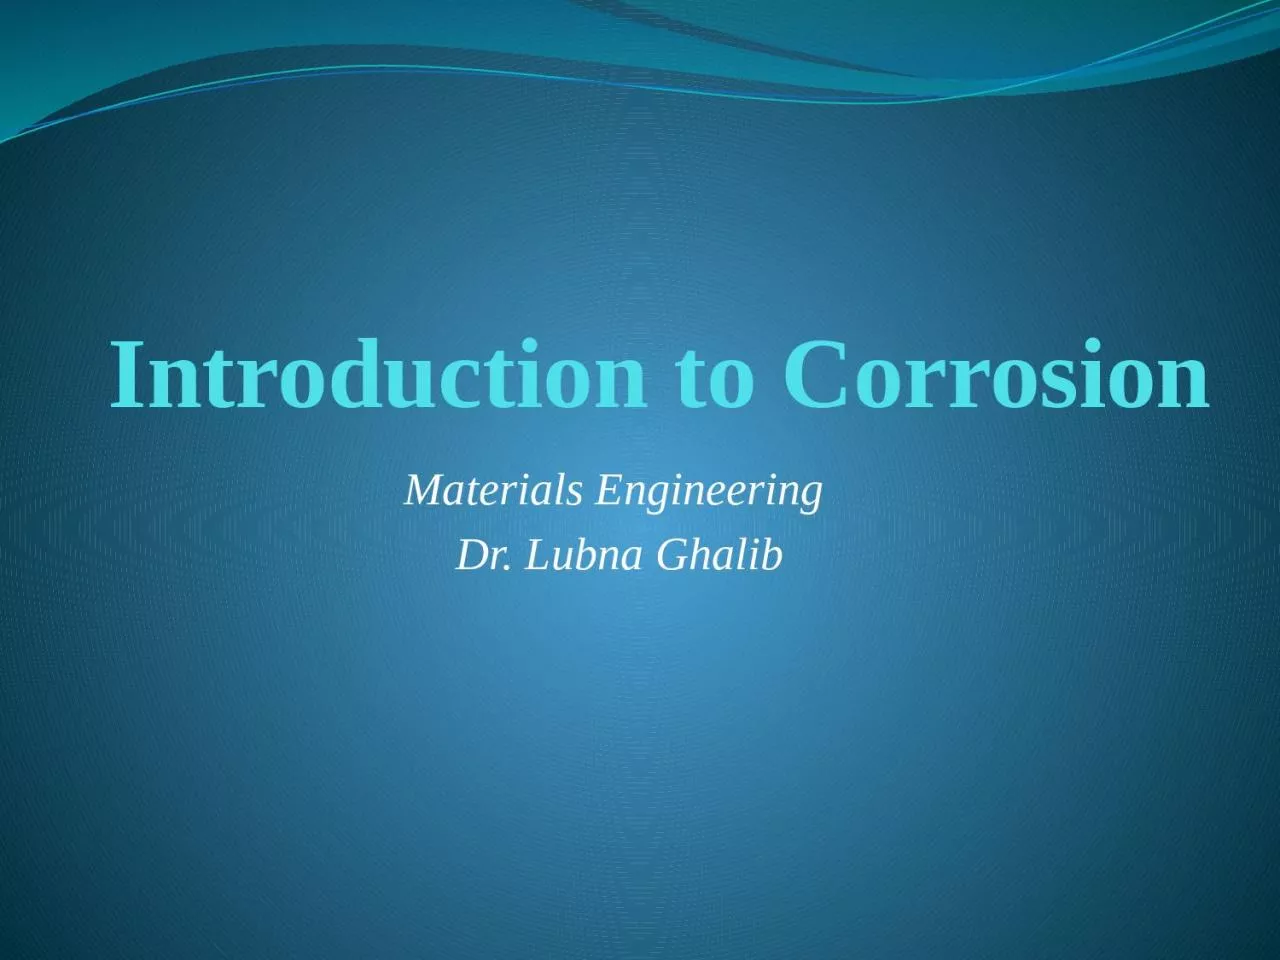 Introduction to Corrosion